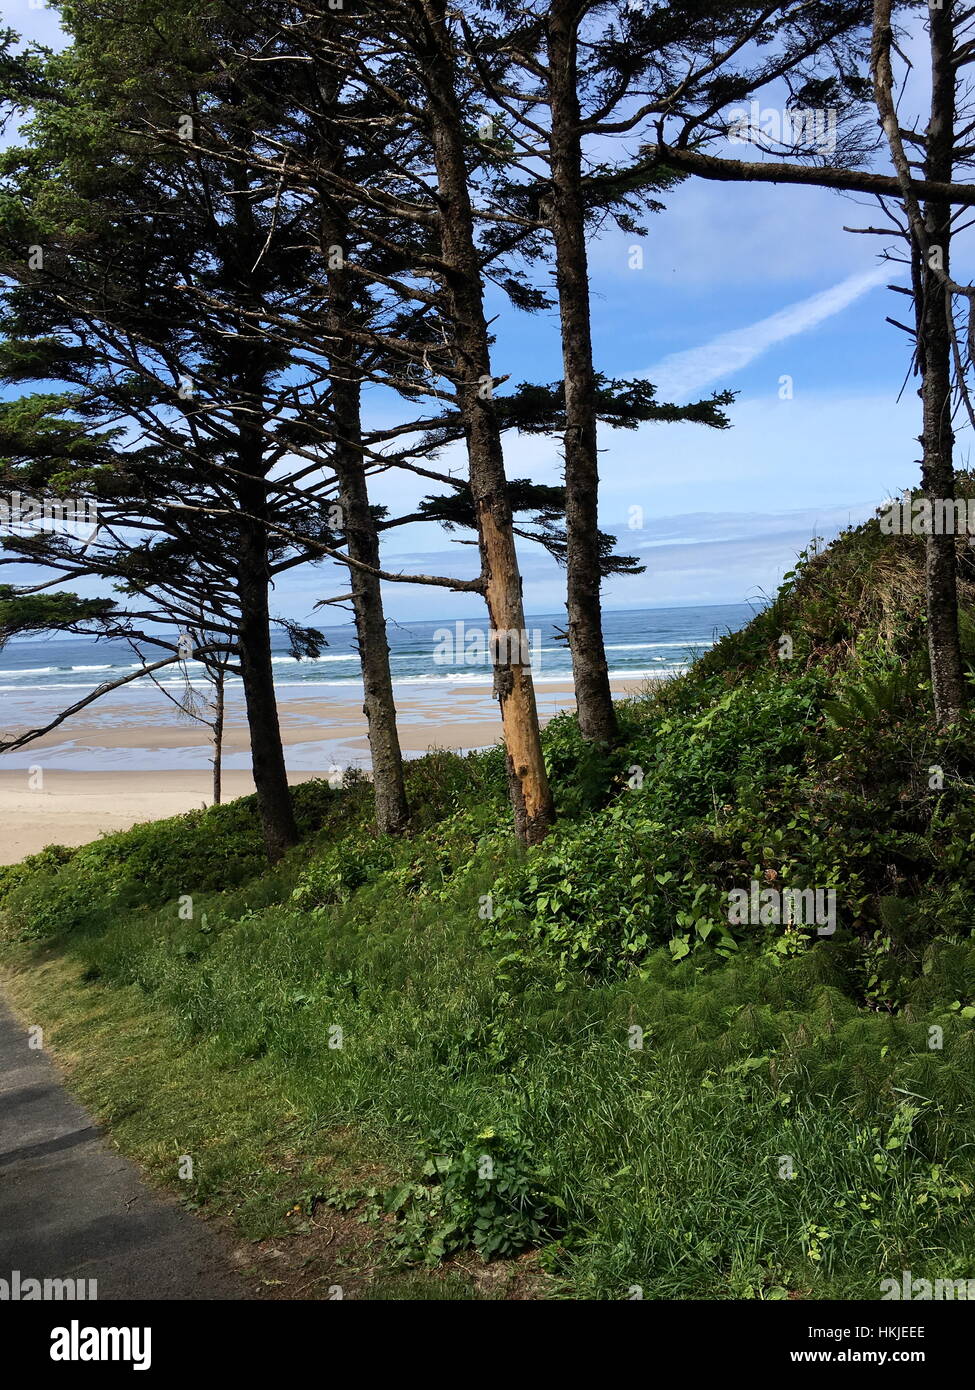 Evergreen trees on green hill leading to beach. Stock Photo